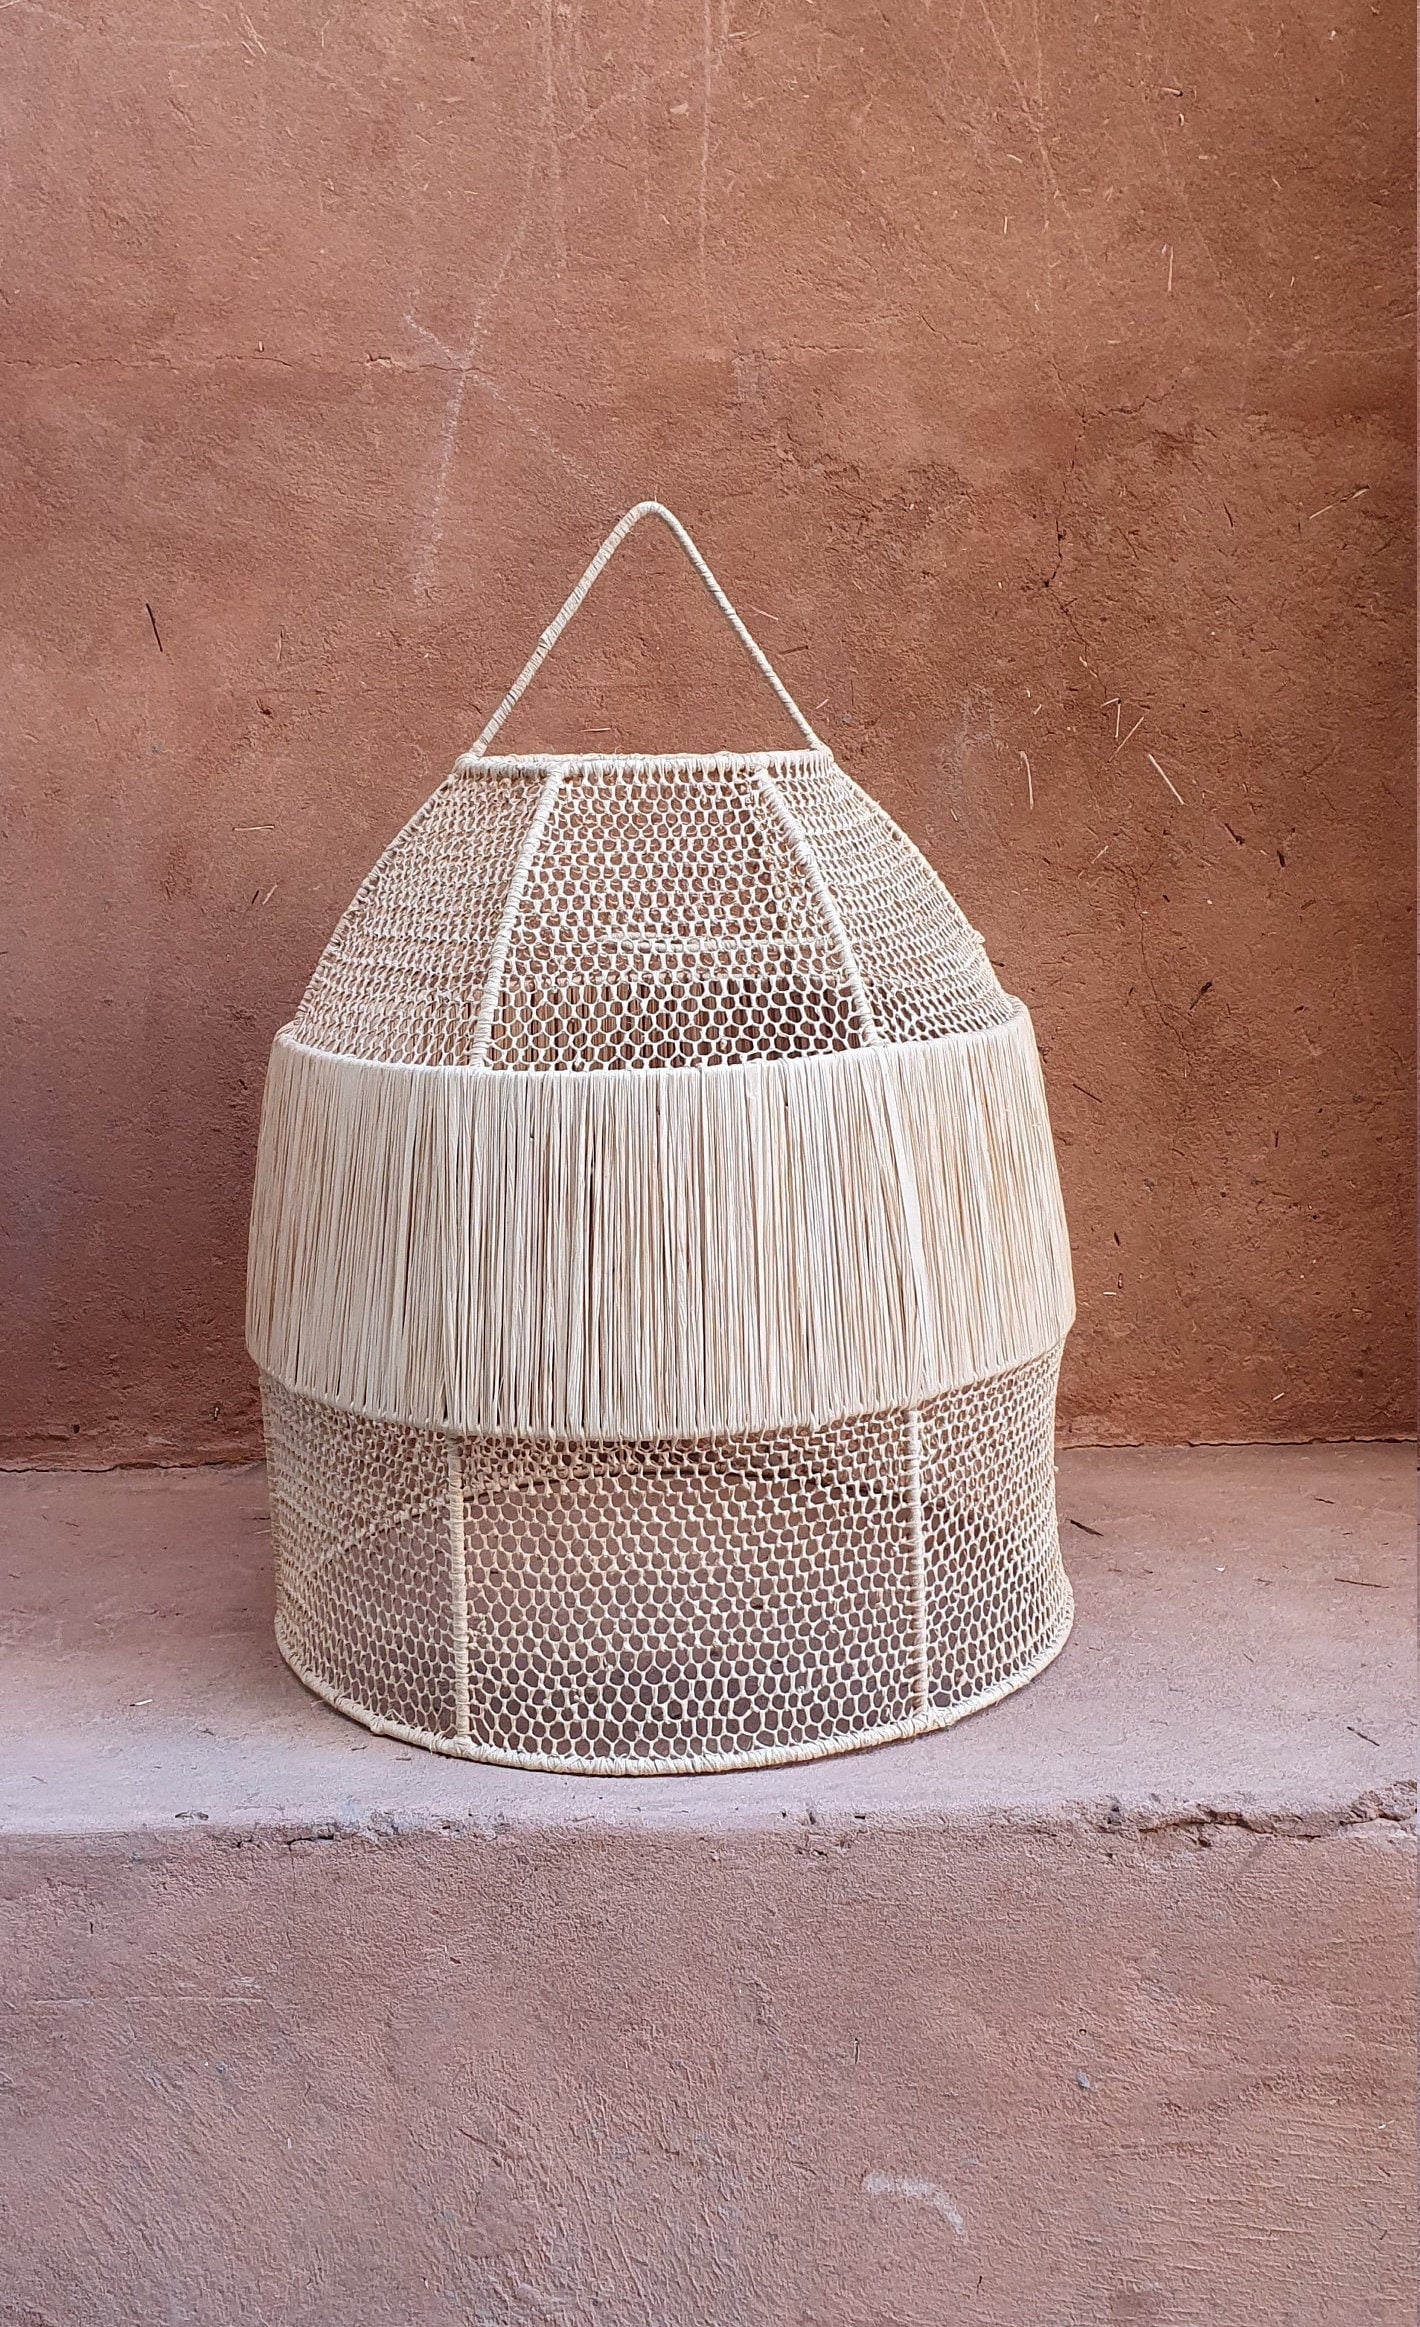 Handcrafted raffia and lace lampshade, 55cm, for home decor